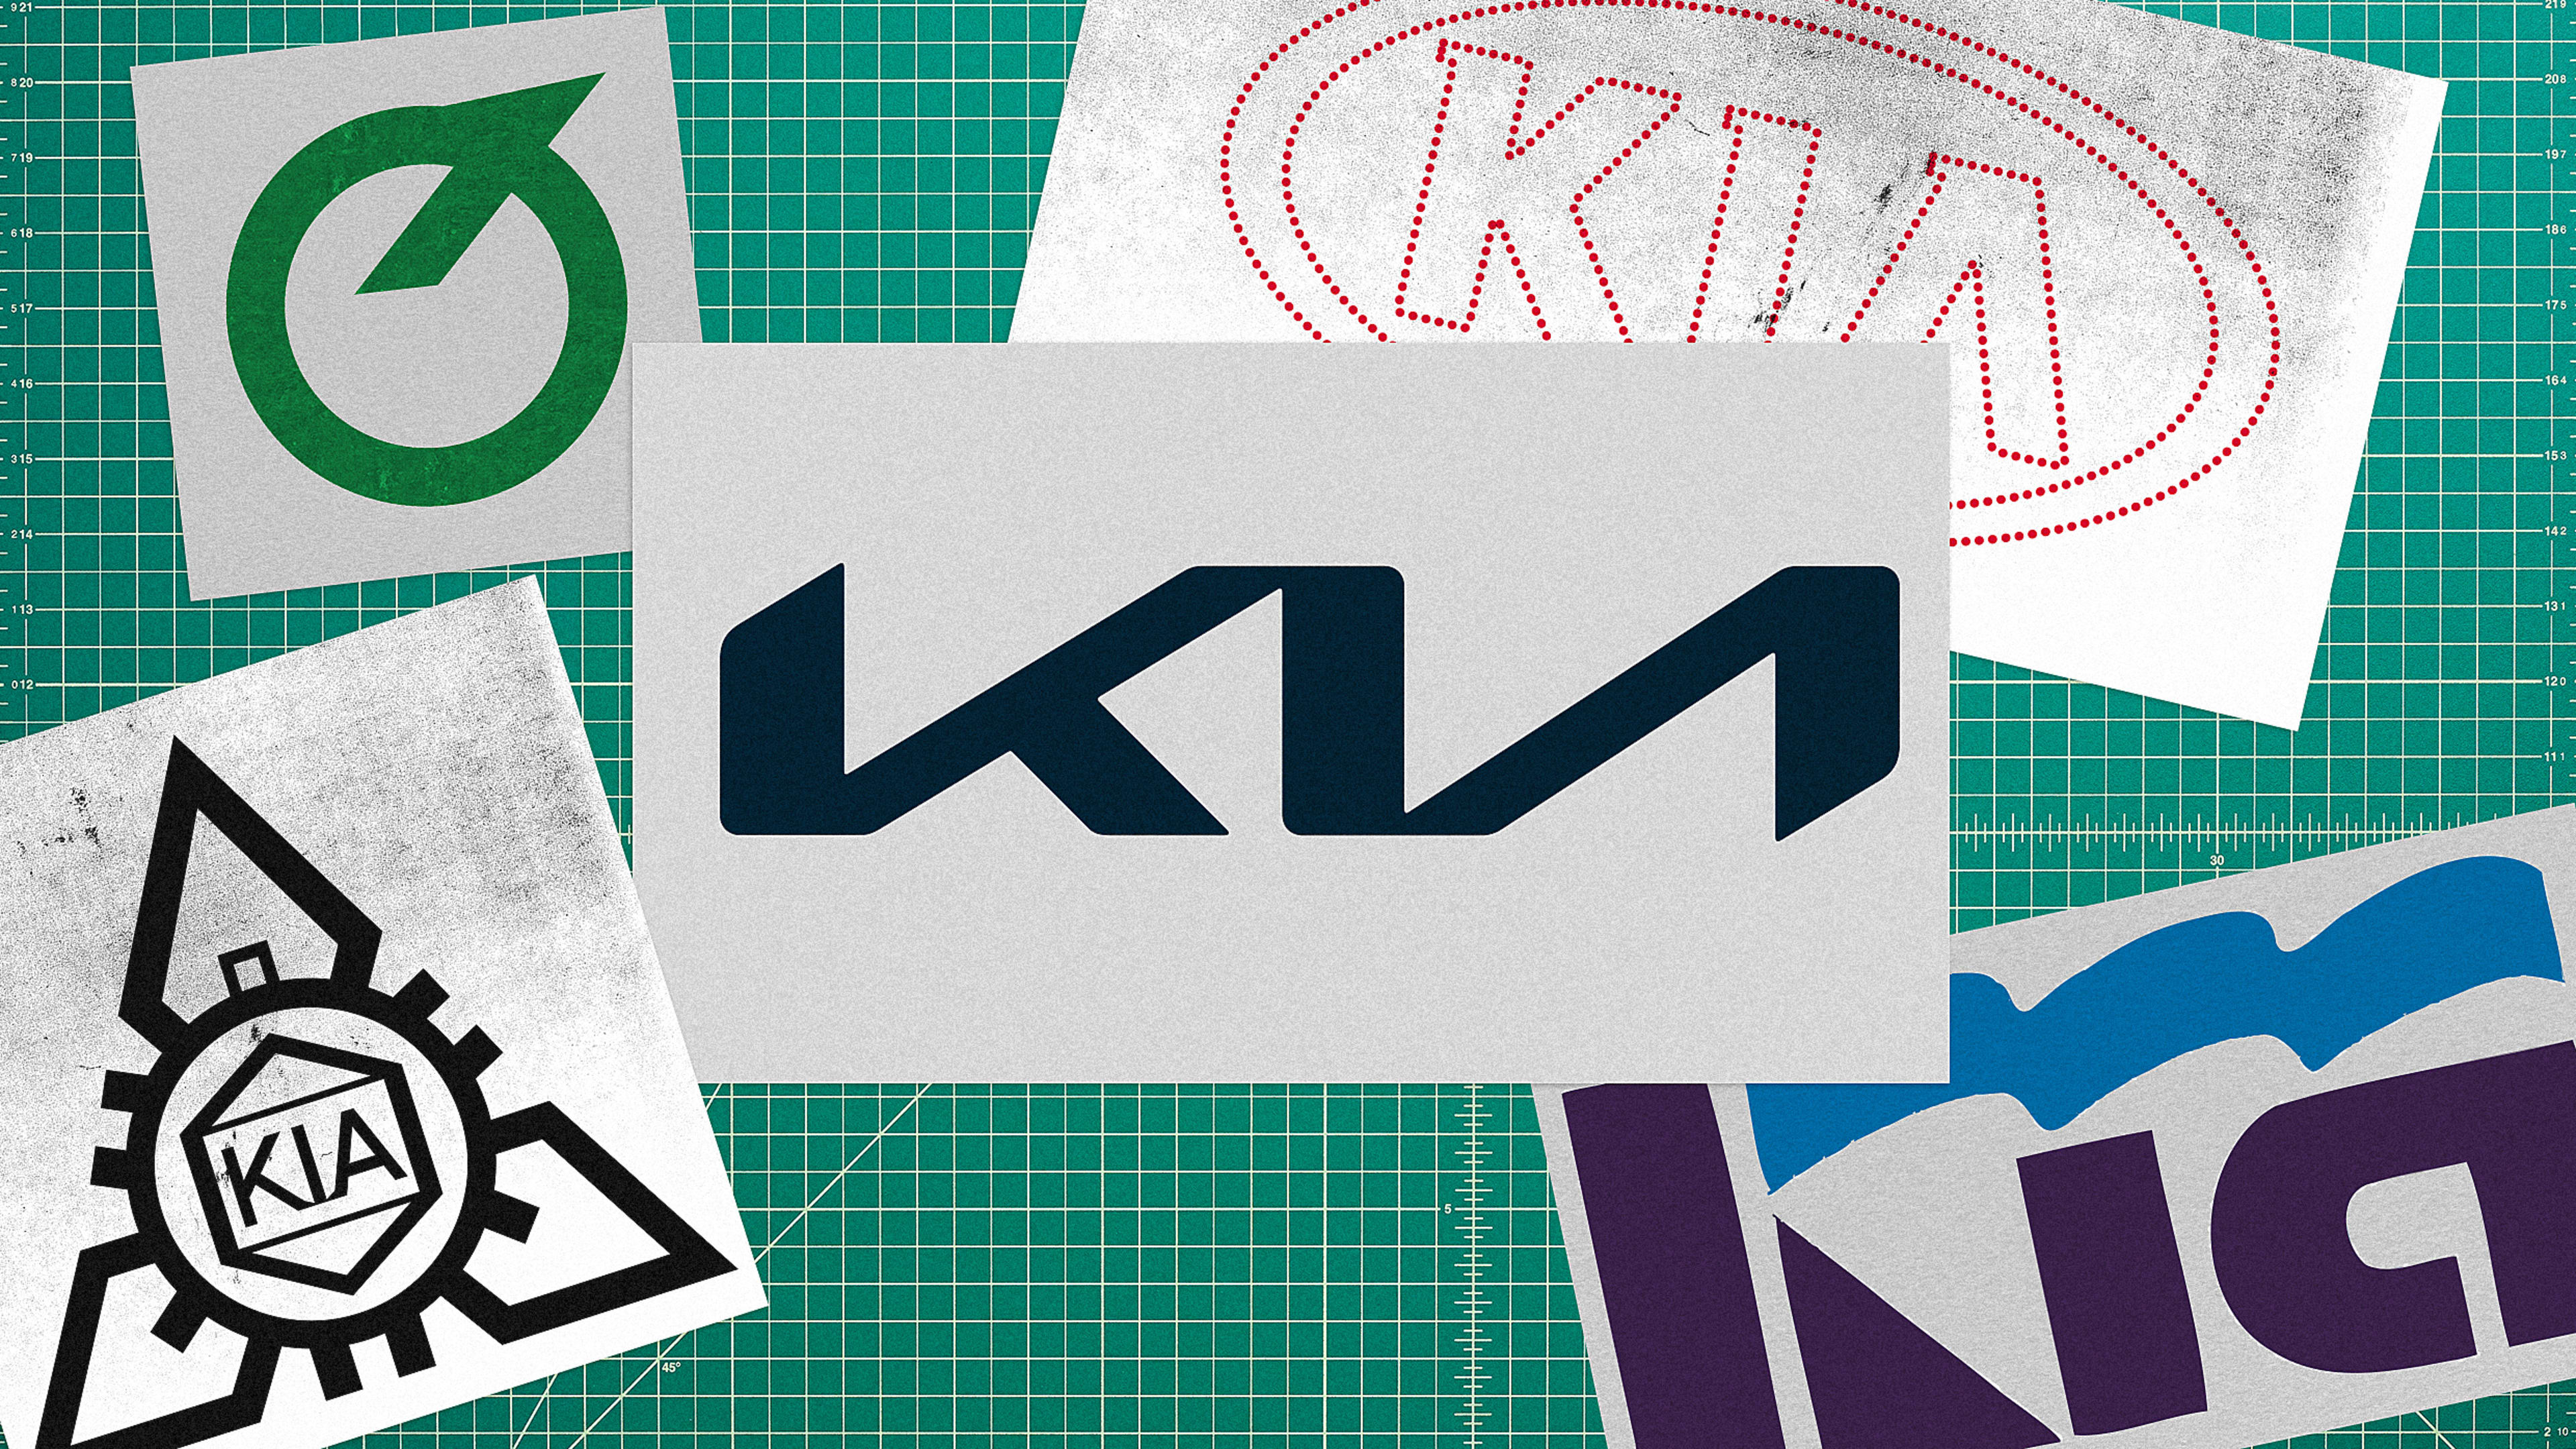 Kia’s strange rebrand is part of a long and varied logo history